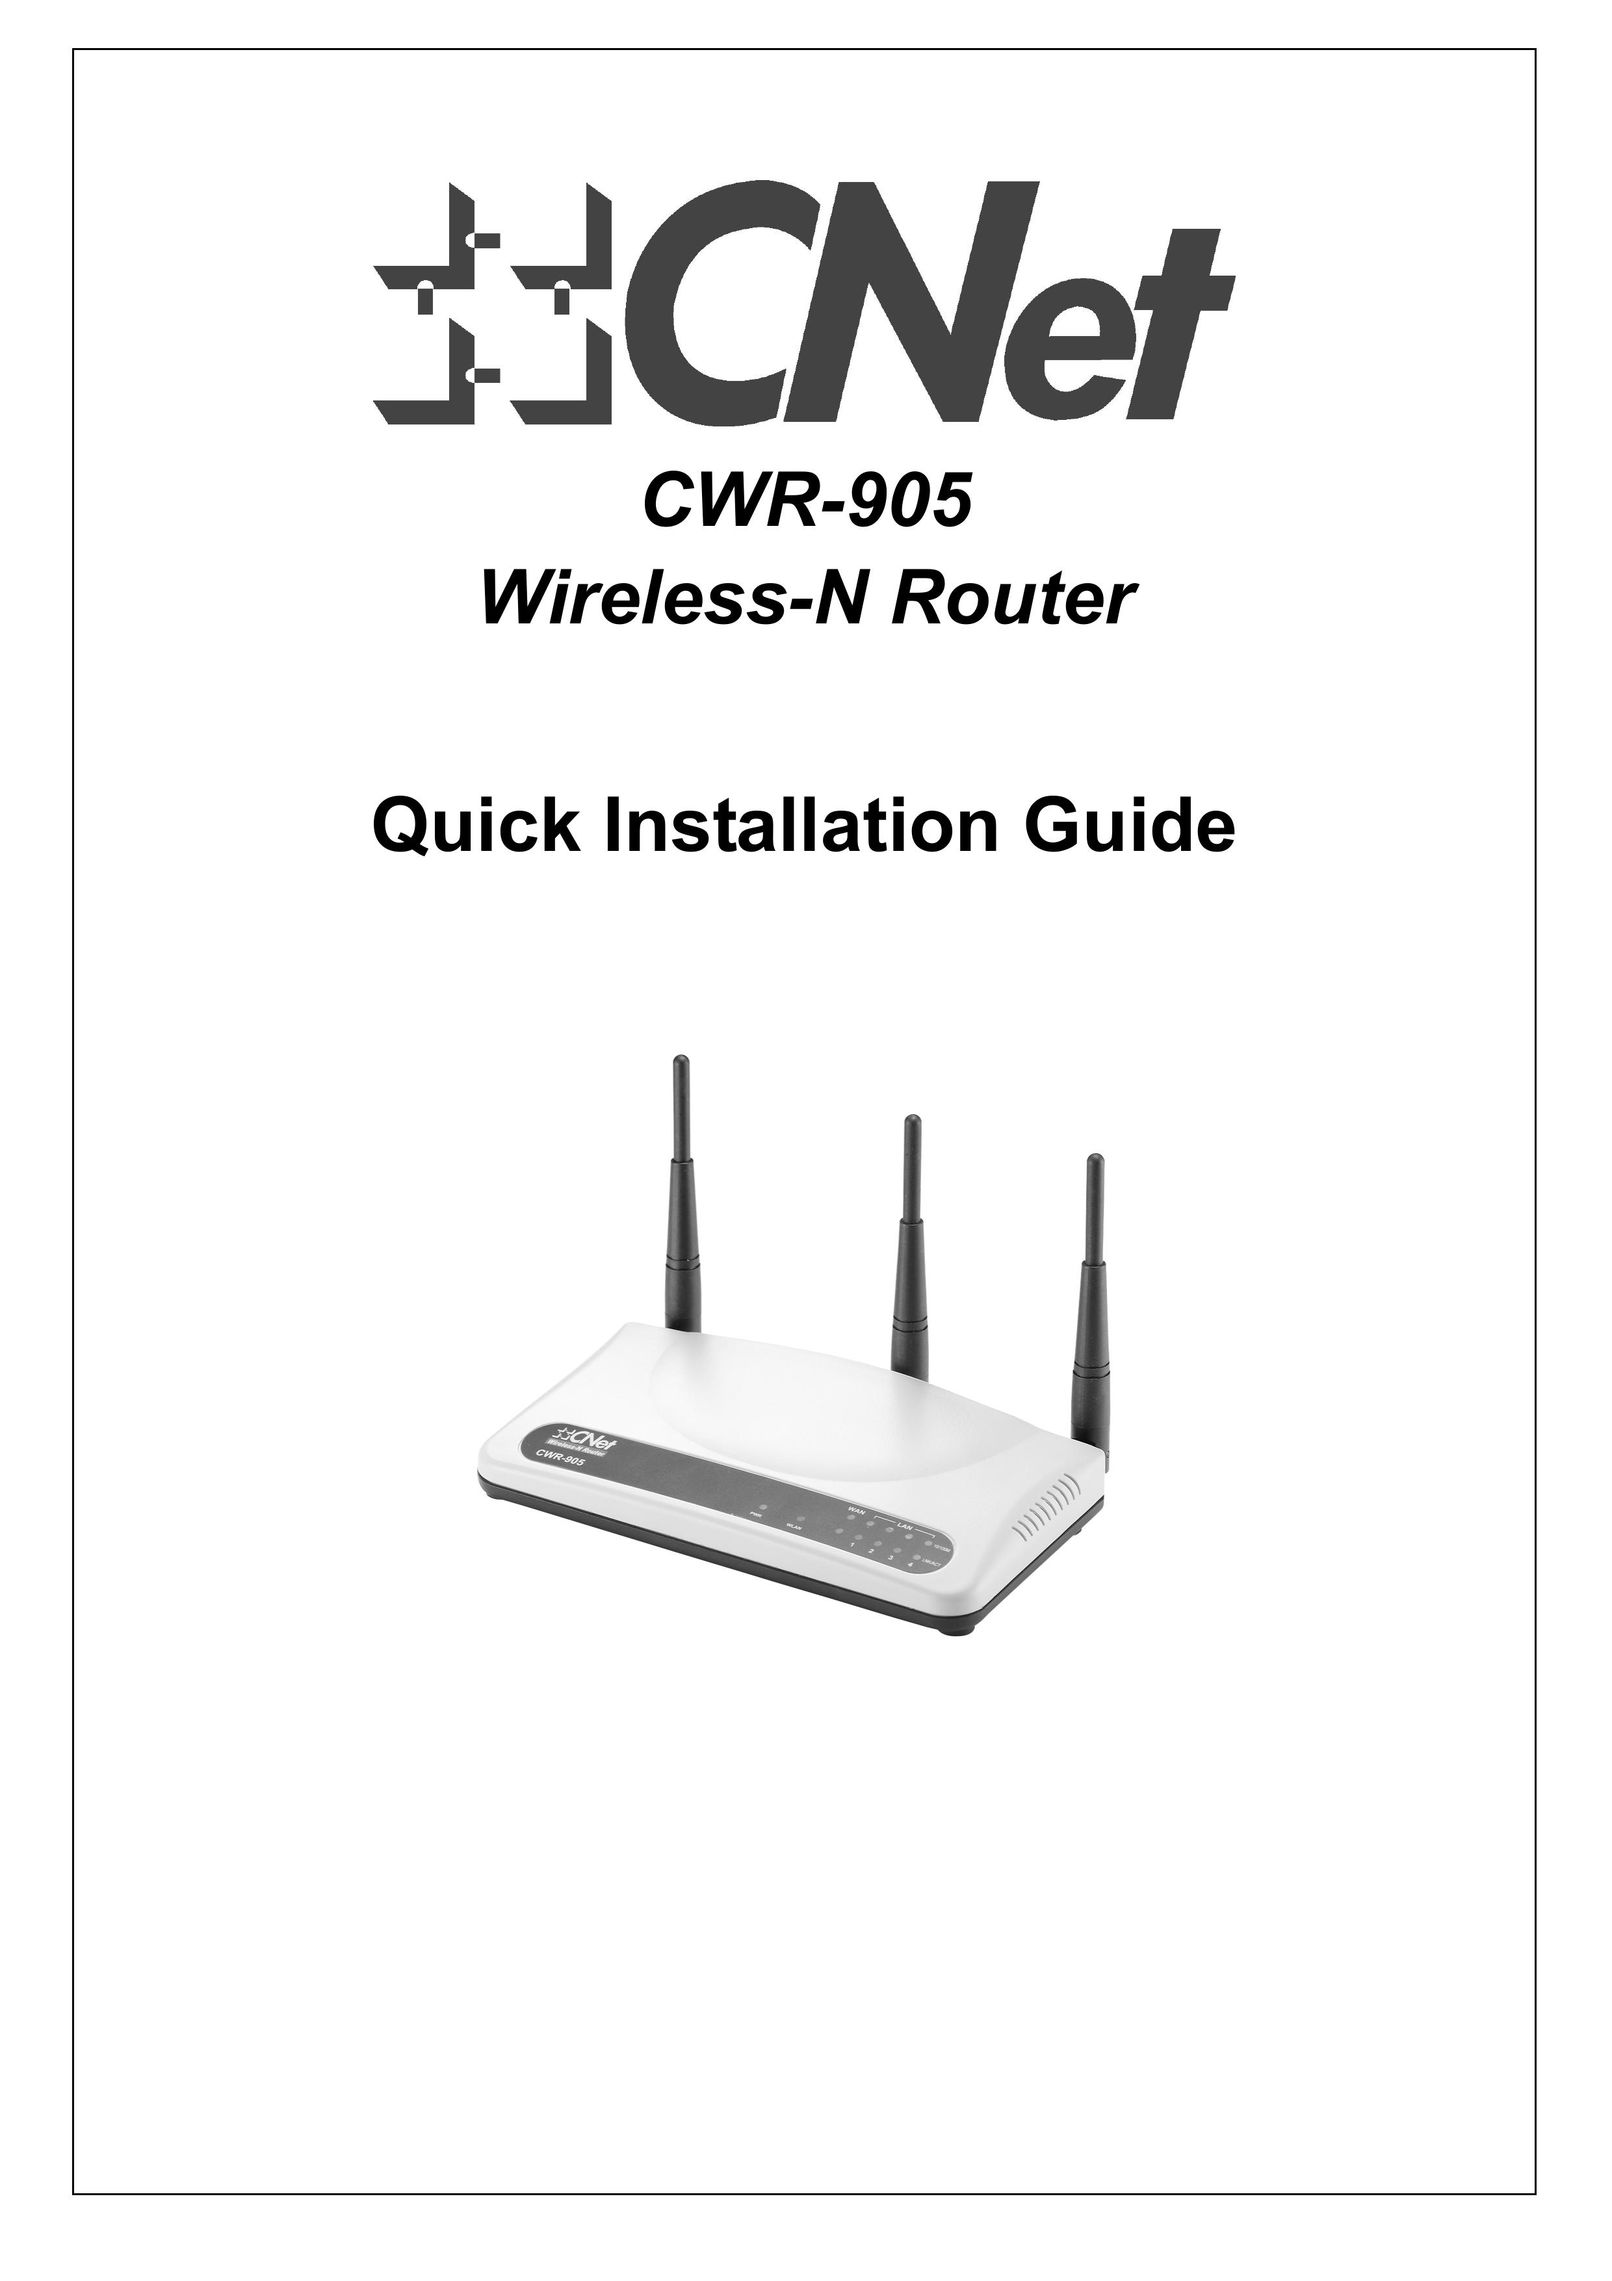 CNET CWR-905 Network Router User Manual